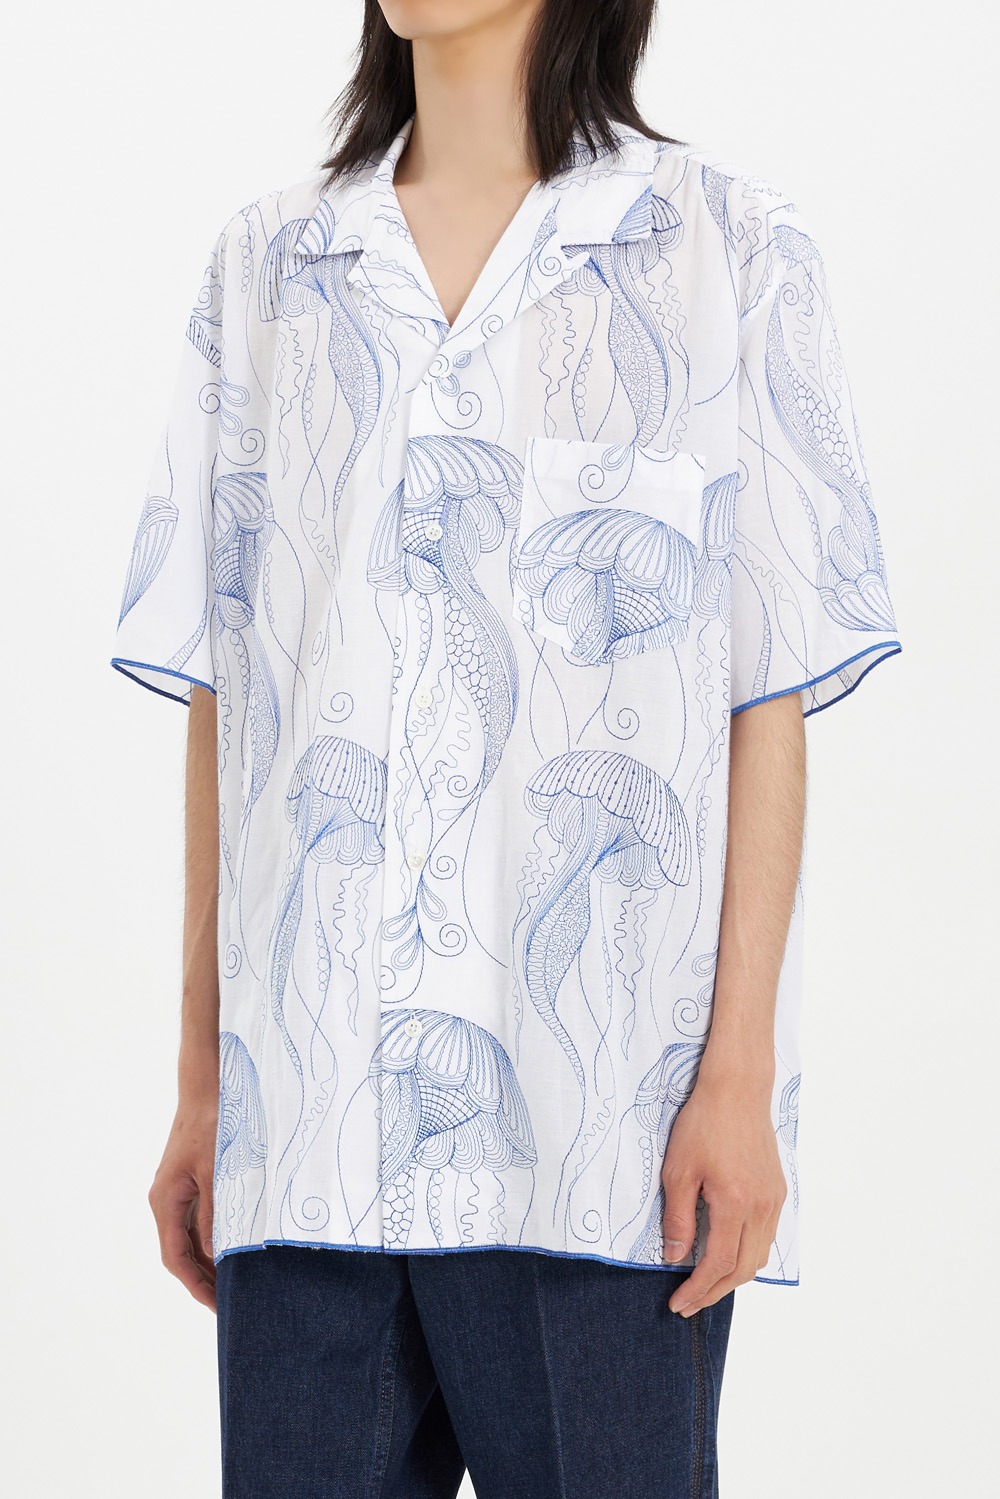 Cotton Embroidery S/S Shirt_White